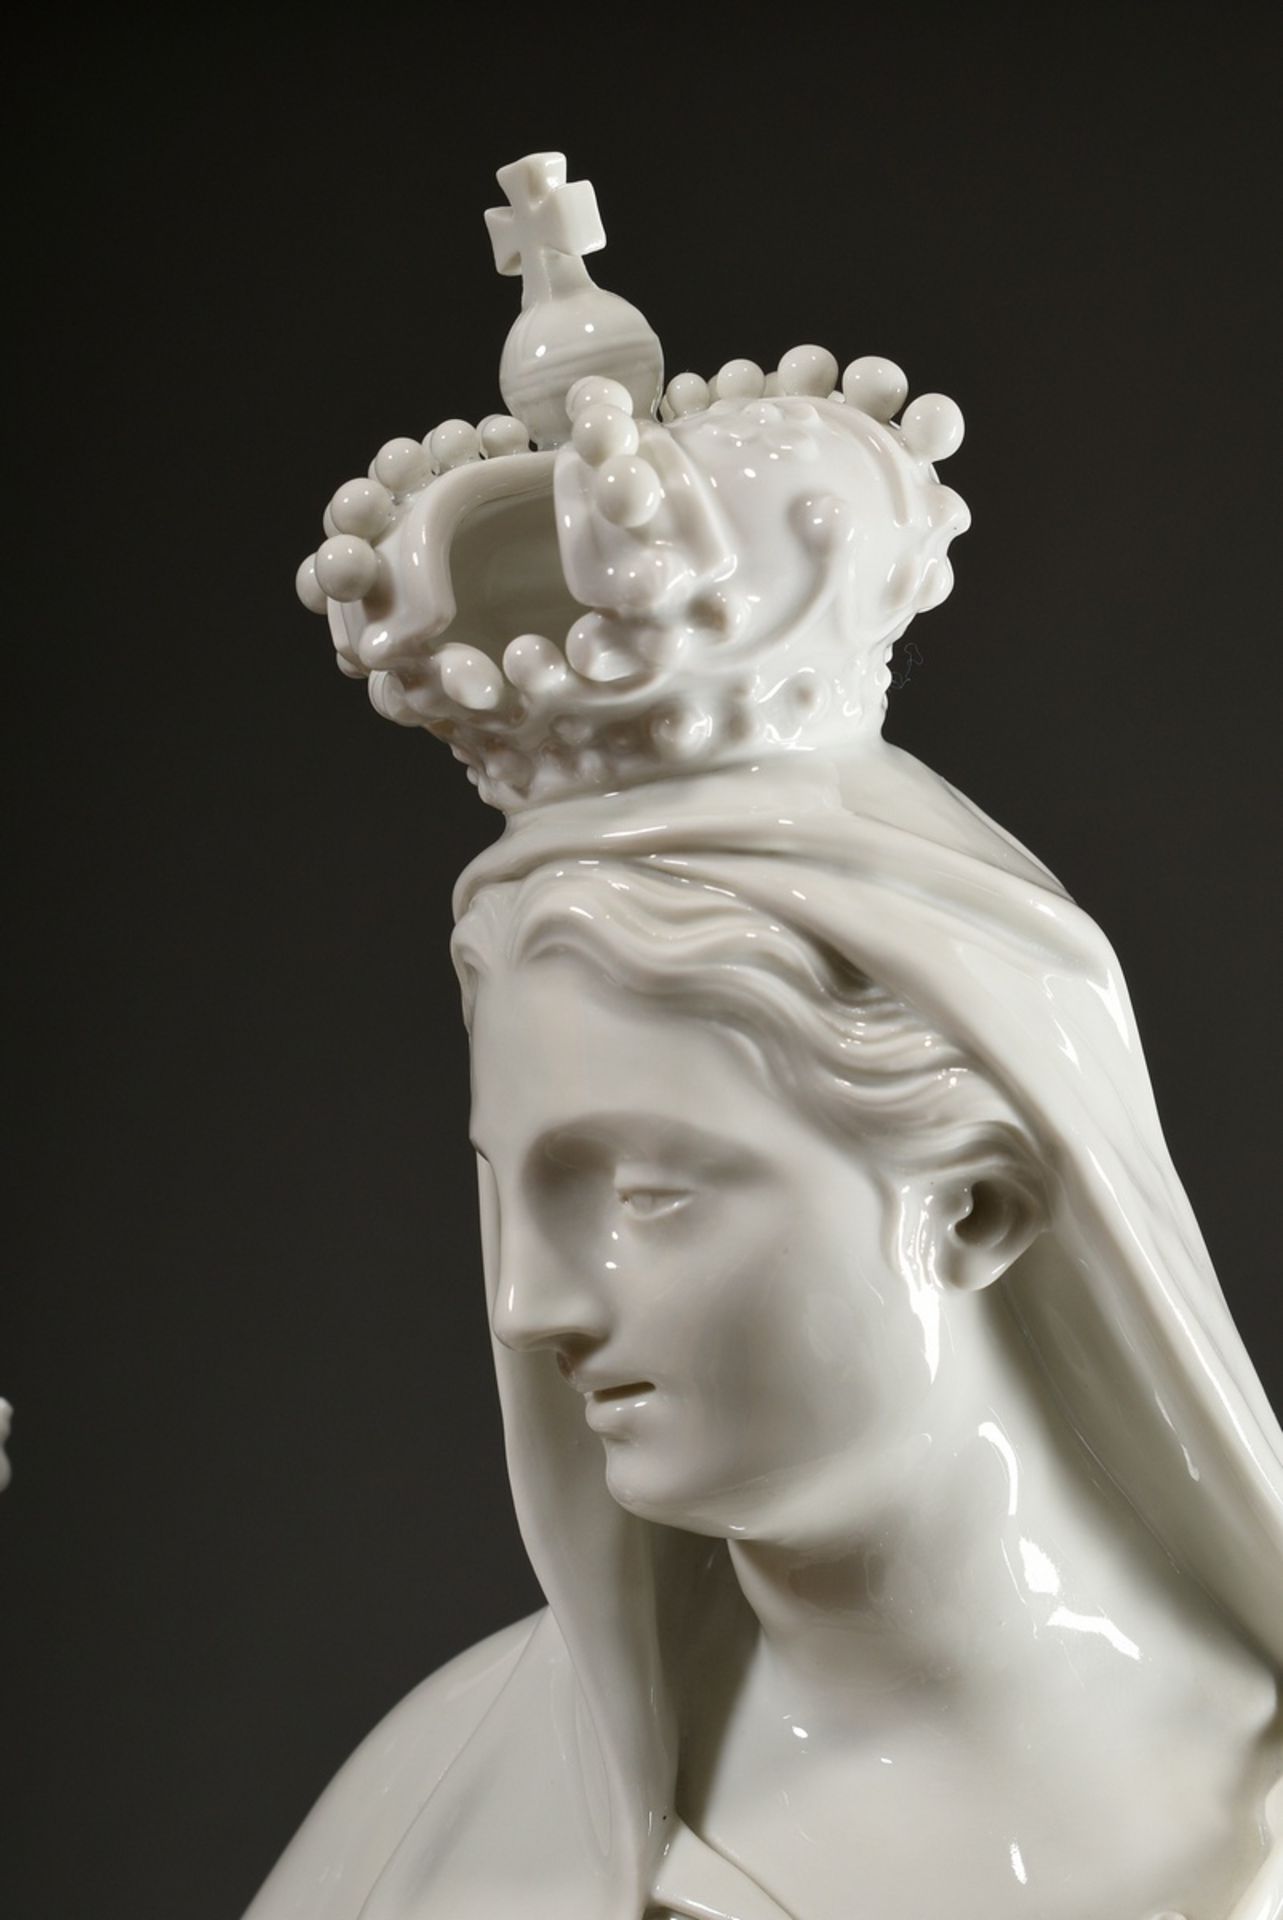 Large Meissen white porcelain figure "Madonna with the Child on the Globe", designed by Johann Gott - Image 4 of 11